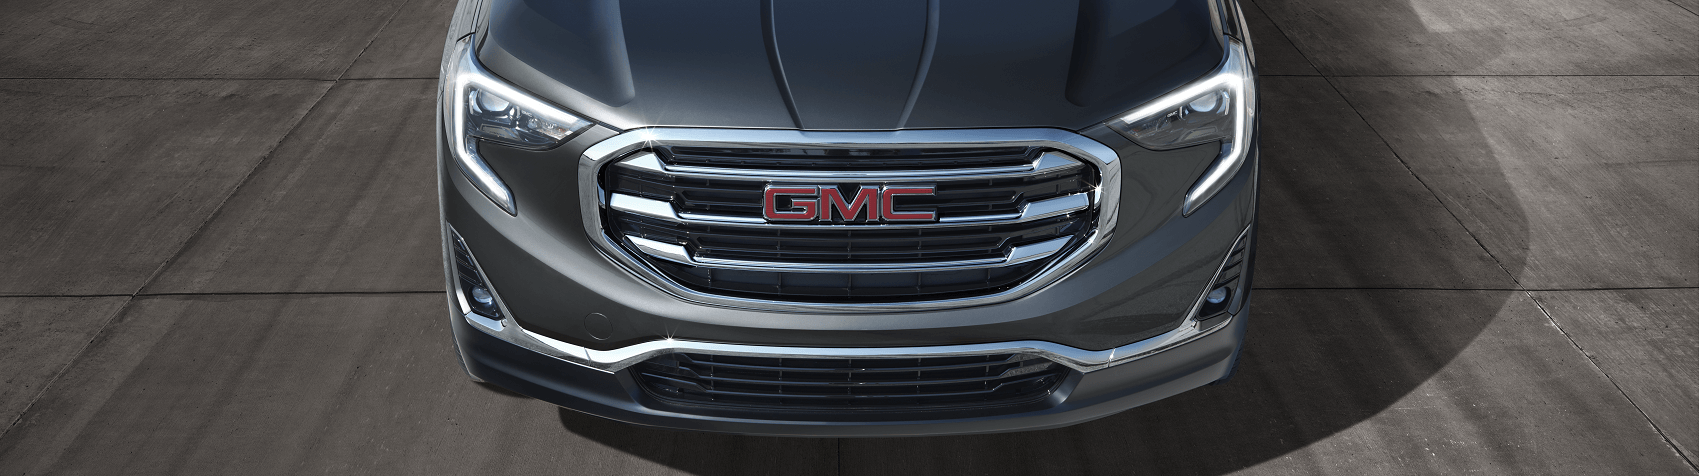 Buying a GMC